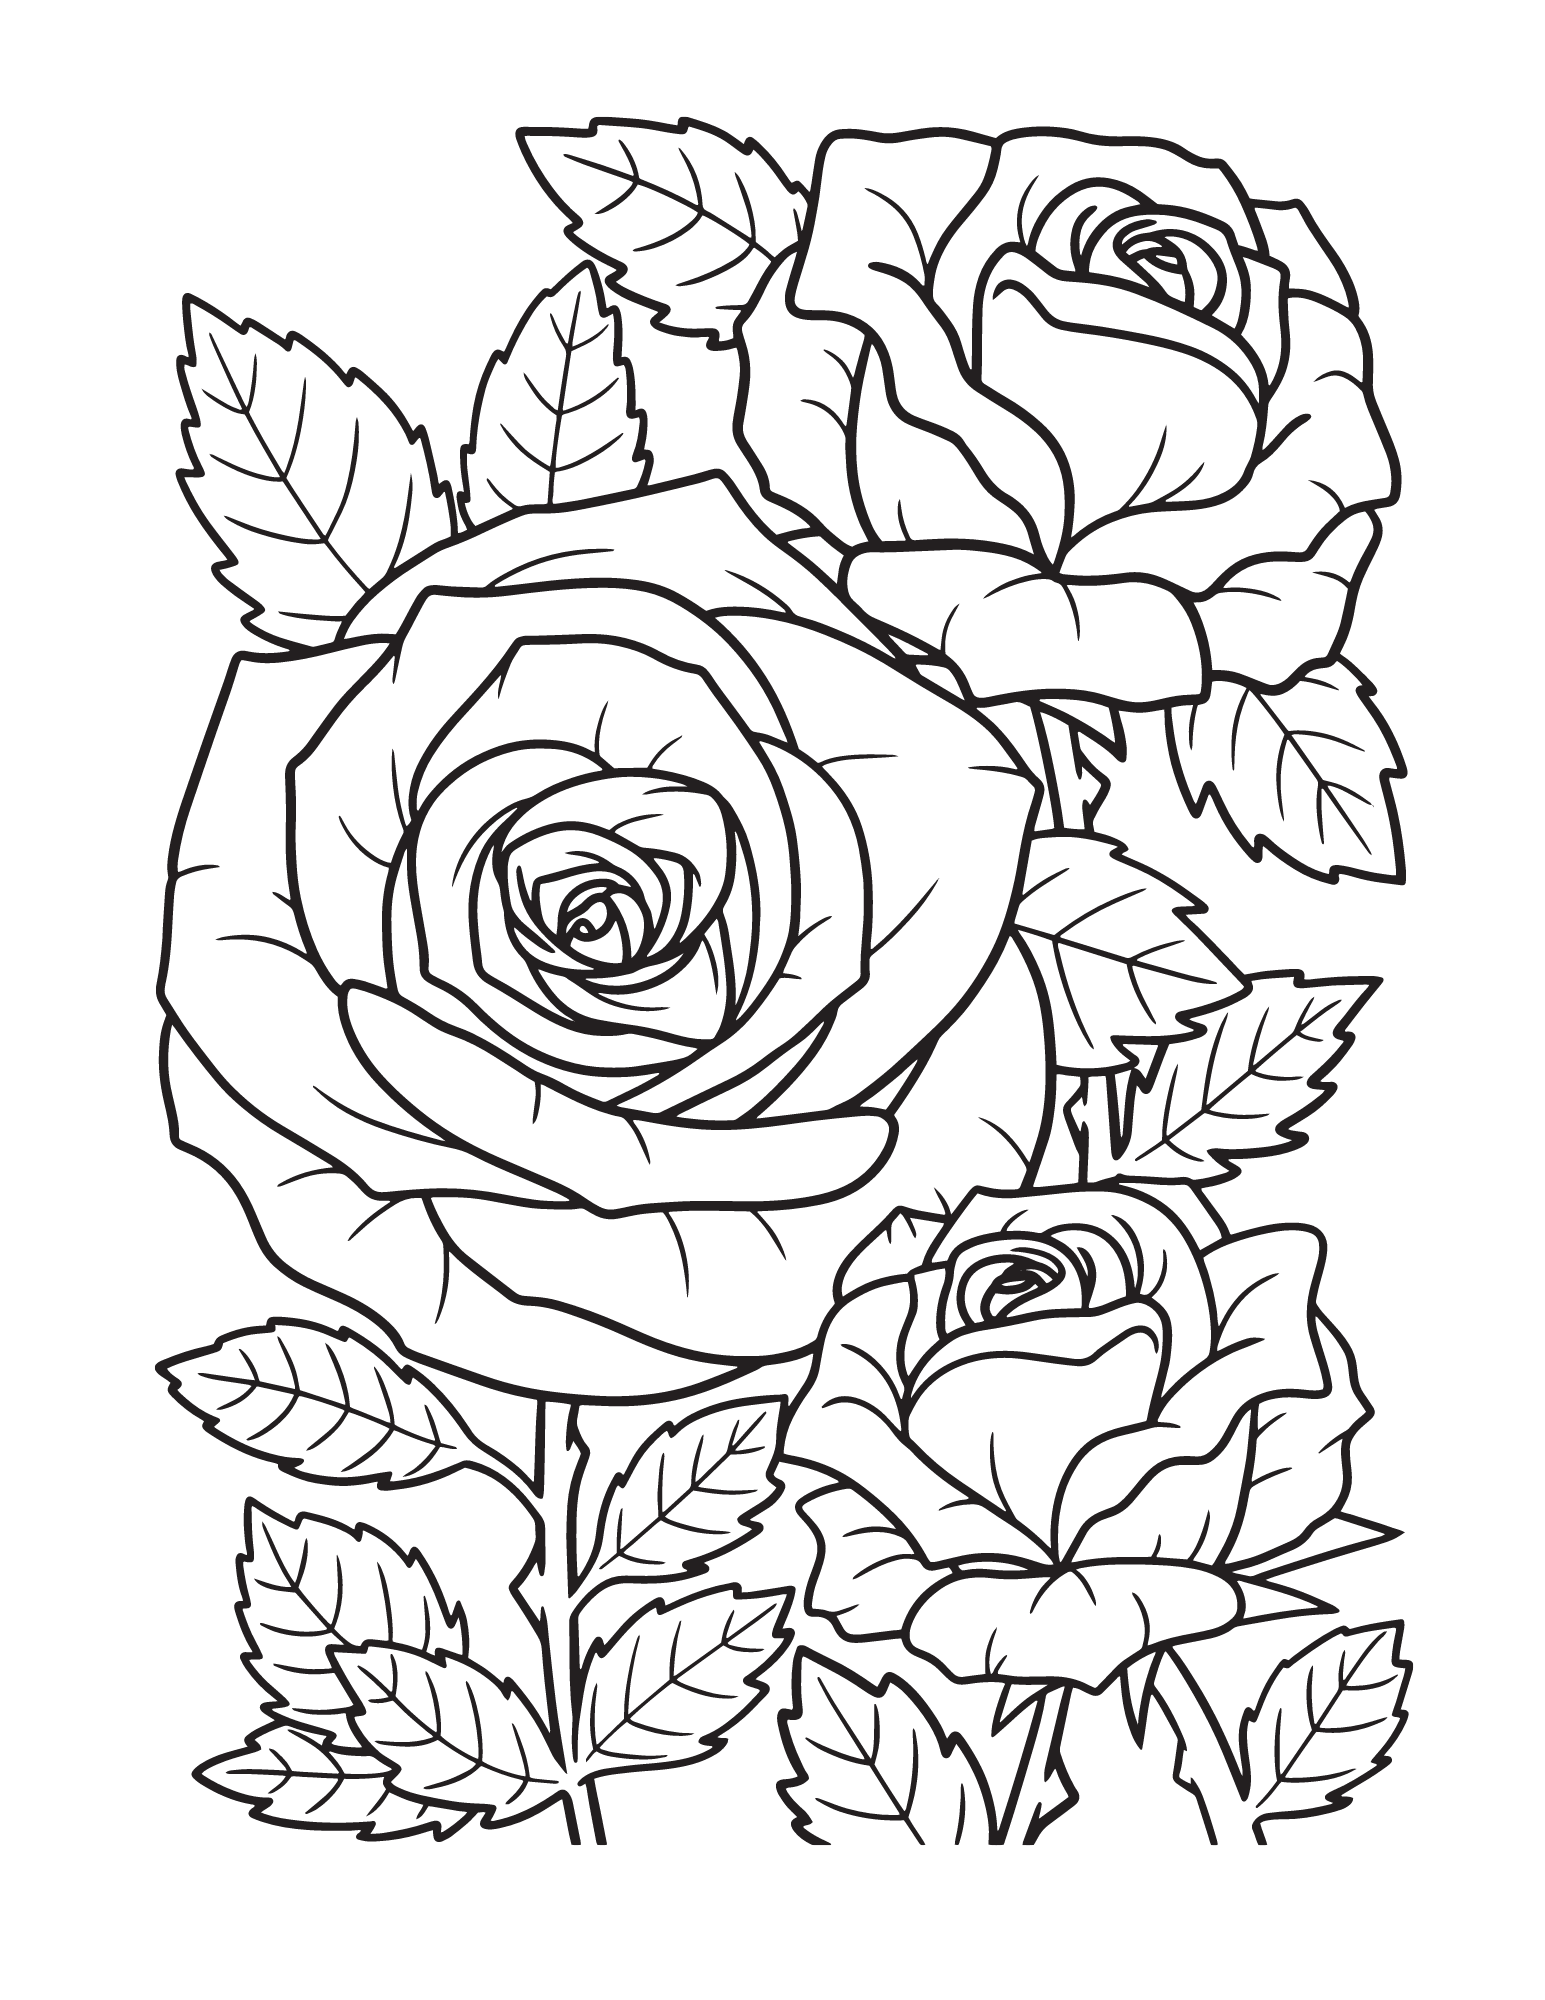 Draw Roses Coloring Pages | Kids Coloring Pages